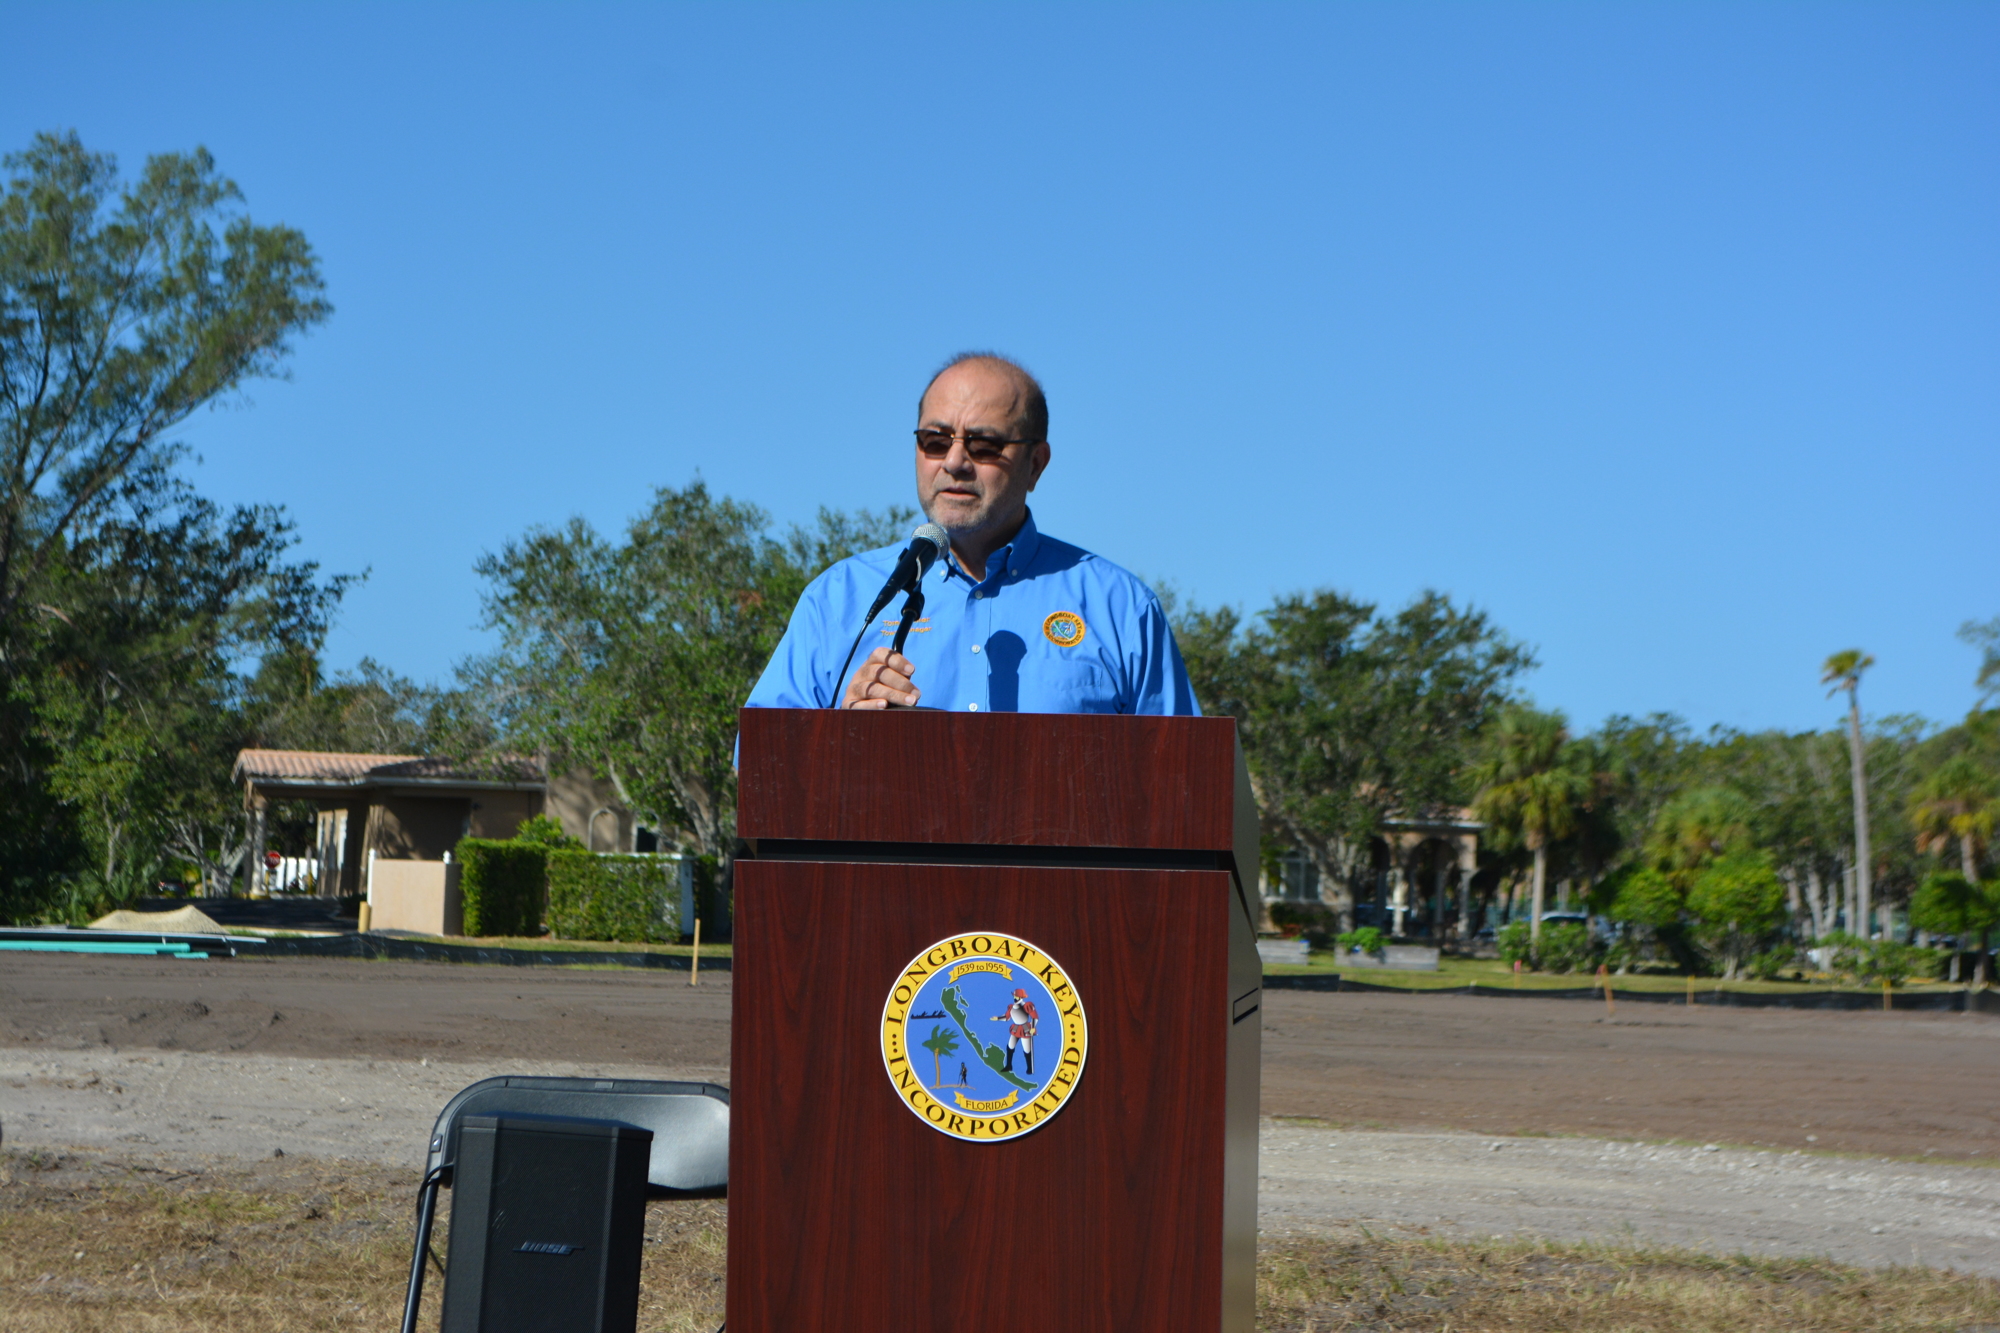 Town Manager Tom Harmer makes opening comments at the groundbreaking ceremony Monday. (Photo by Lauren Tronstad)